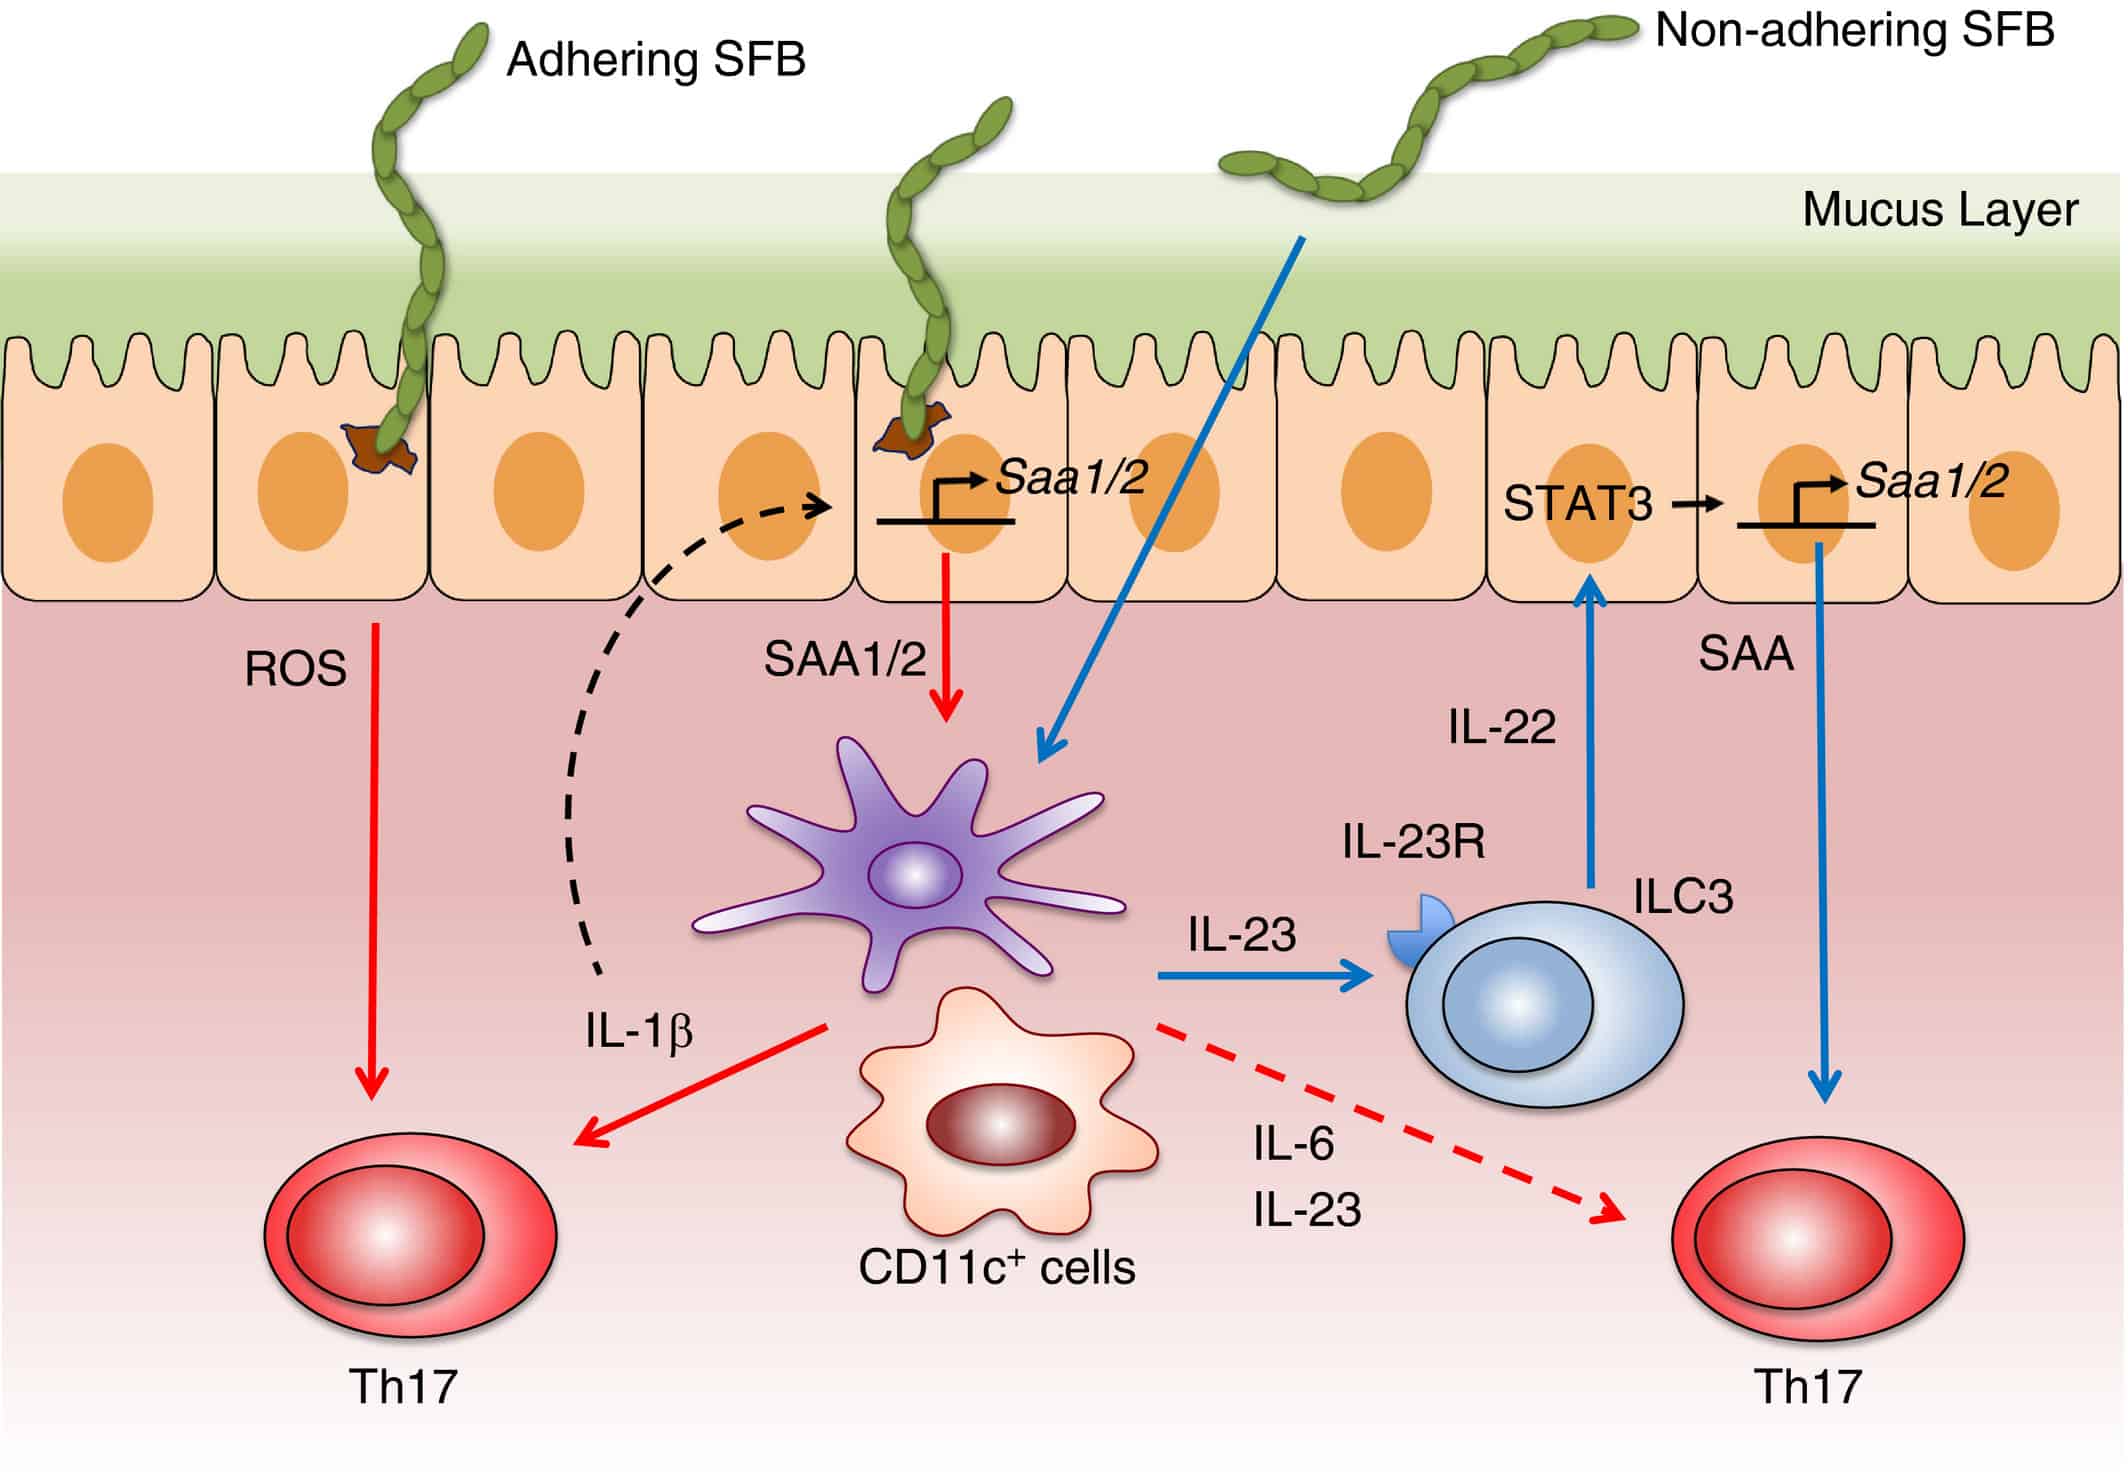 Segmented filamentous bacteria (SFB) adhesion and serum amyloid A (SAA) induction are critical factors in T helper type 17 (Th17) cell differentiation. Adhesion of SFB to the intestinal epithelial cells (IECs) of the ileum induces the production of SAA1 and SAA2. SAA proteins act on CD11c+ cells in the lamina propria (LP) to promote the production of interleukin-6 (IL-6) and IL-23 that foster differentiation of naive CD4+ T cells into Th17 cells. SAA also triggers antigen-presenting cells (APCs) to secrete IL-1β that induces Th17 cell differentiation. IL-1β from APCs can cycle back to act on IECs to elicit further SAA production, creating an amplification loop that favours greater Th17 cell induction. SFB adhesion to IEC also stimulates reactive oxygen species (ROS) that participate in the polarization of Th17 cells. In a separate signalling circuit where adhesion is not vital, SFB can stimulate production of IL-23 from APCs that subsequently acts on type 3 innate lymphoid cells (ILC3) to secrete IL-22. IL-22 from ILC3 signals through IEC in a STAT3-dependent manner to prompt the secretion of SAA that promotes the production of IL-17A from primed RORɣt+ Th17 cells.